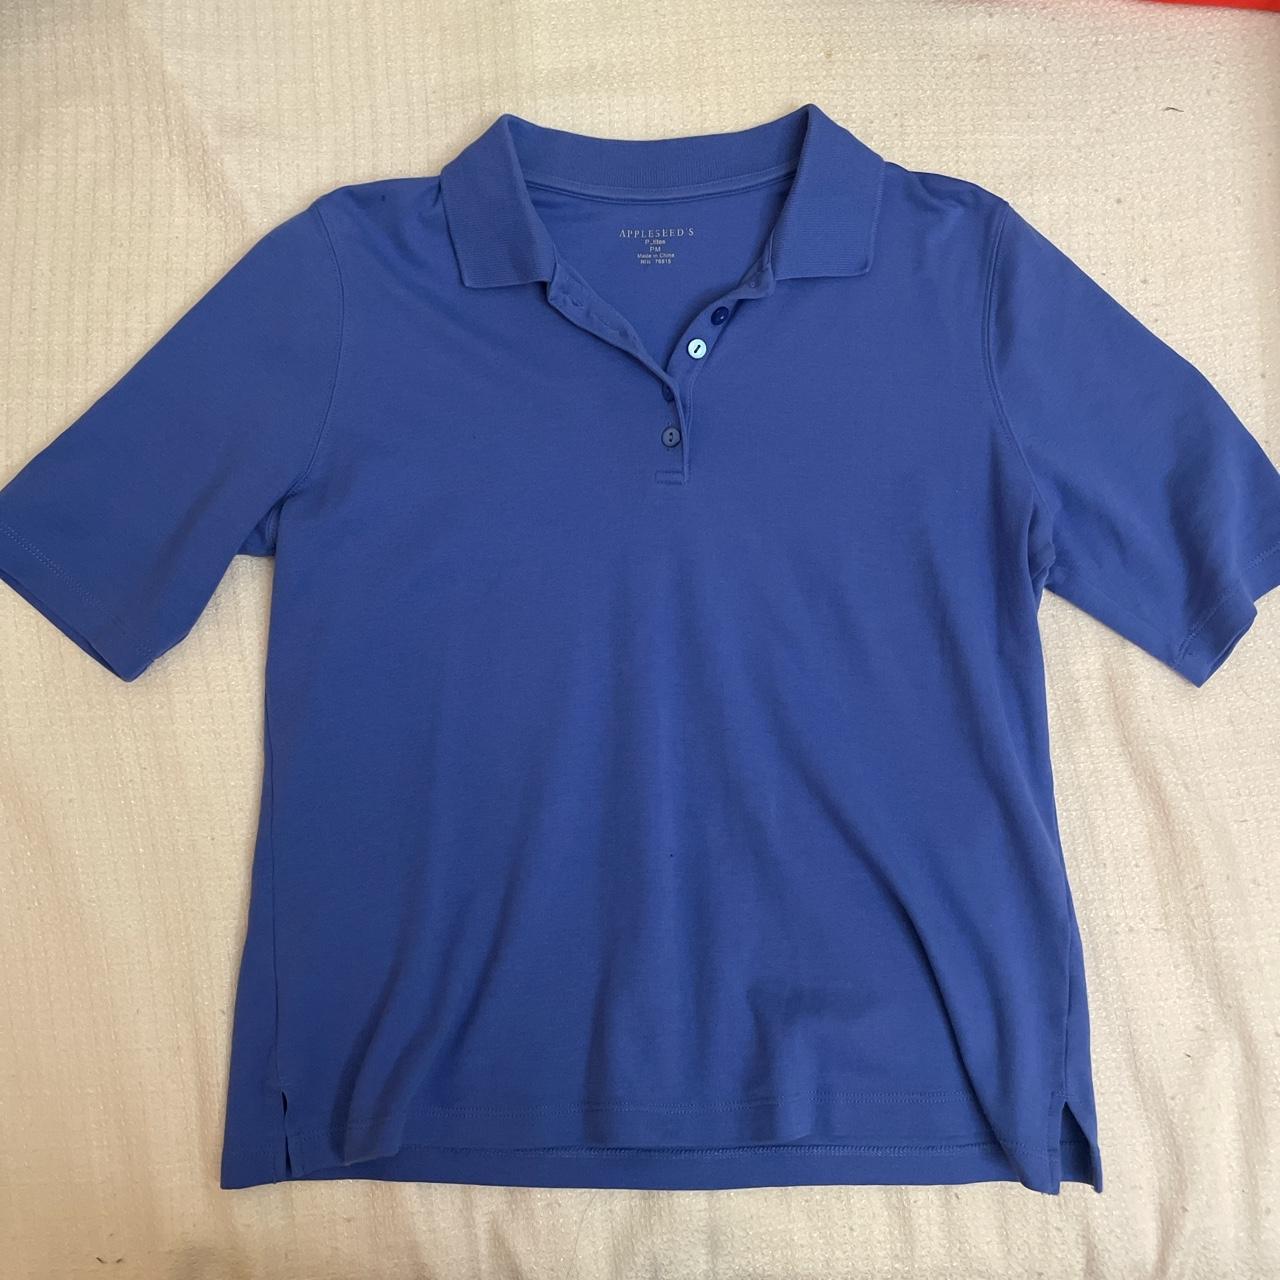 Appleseed's Women's Polo-shirts | Depop